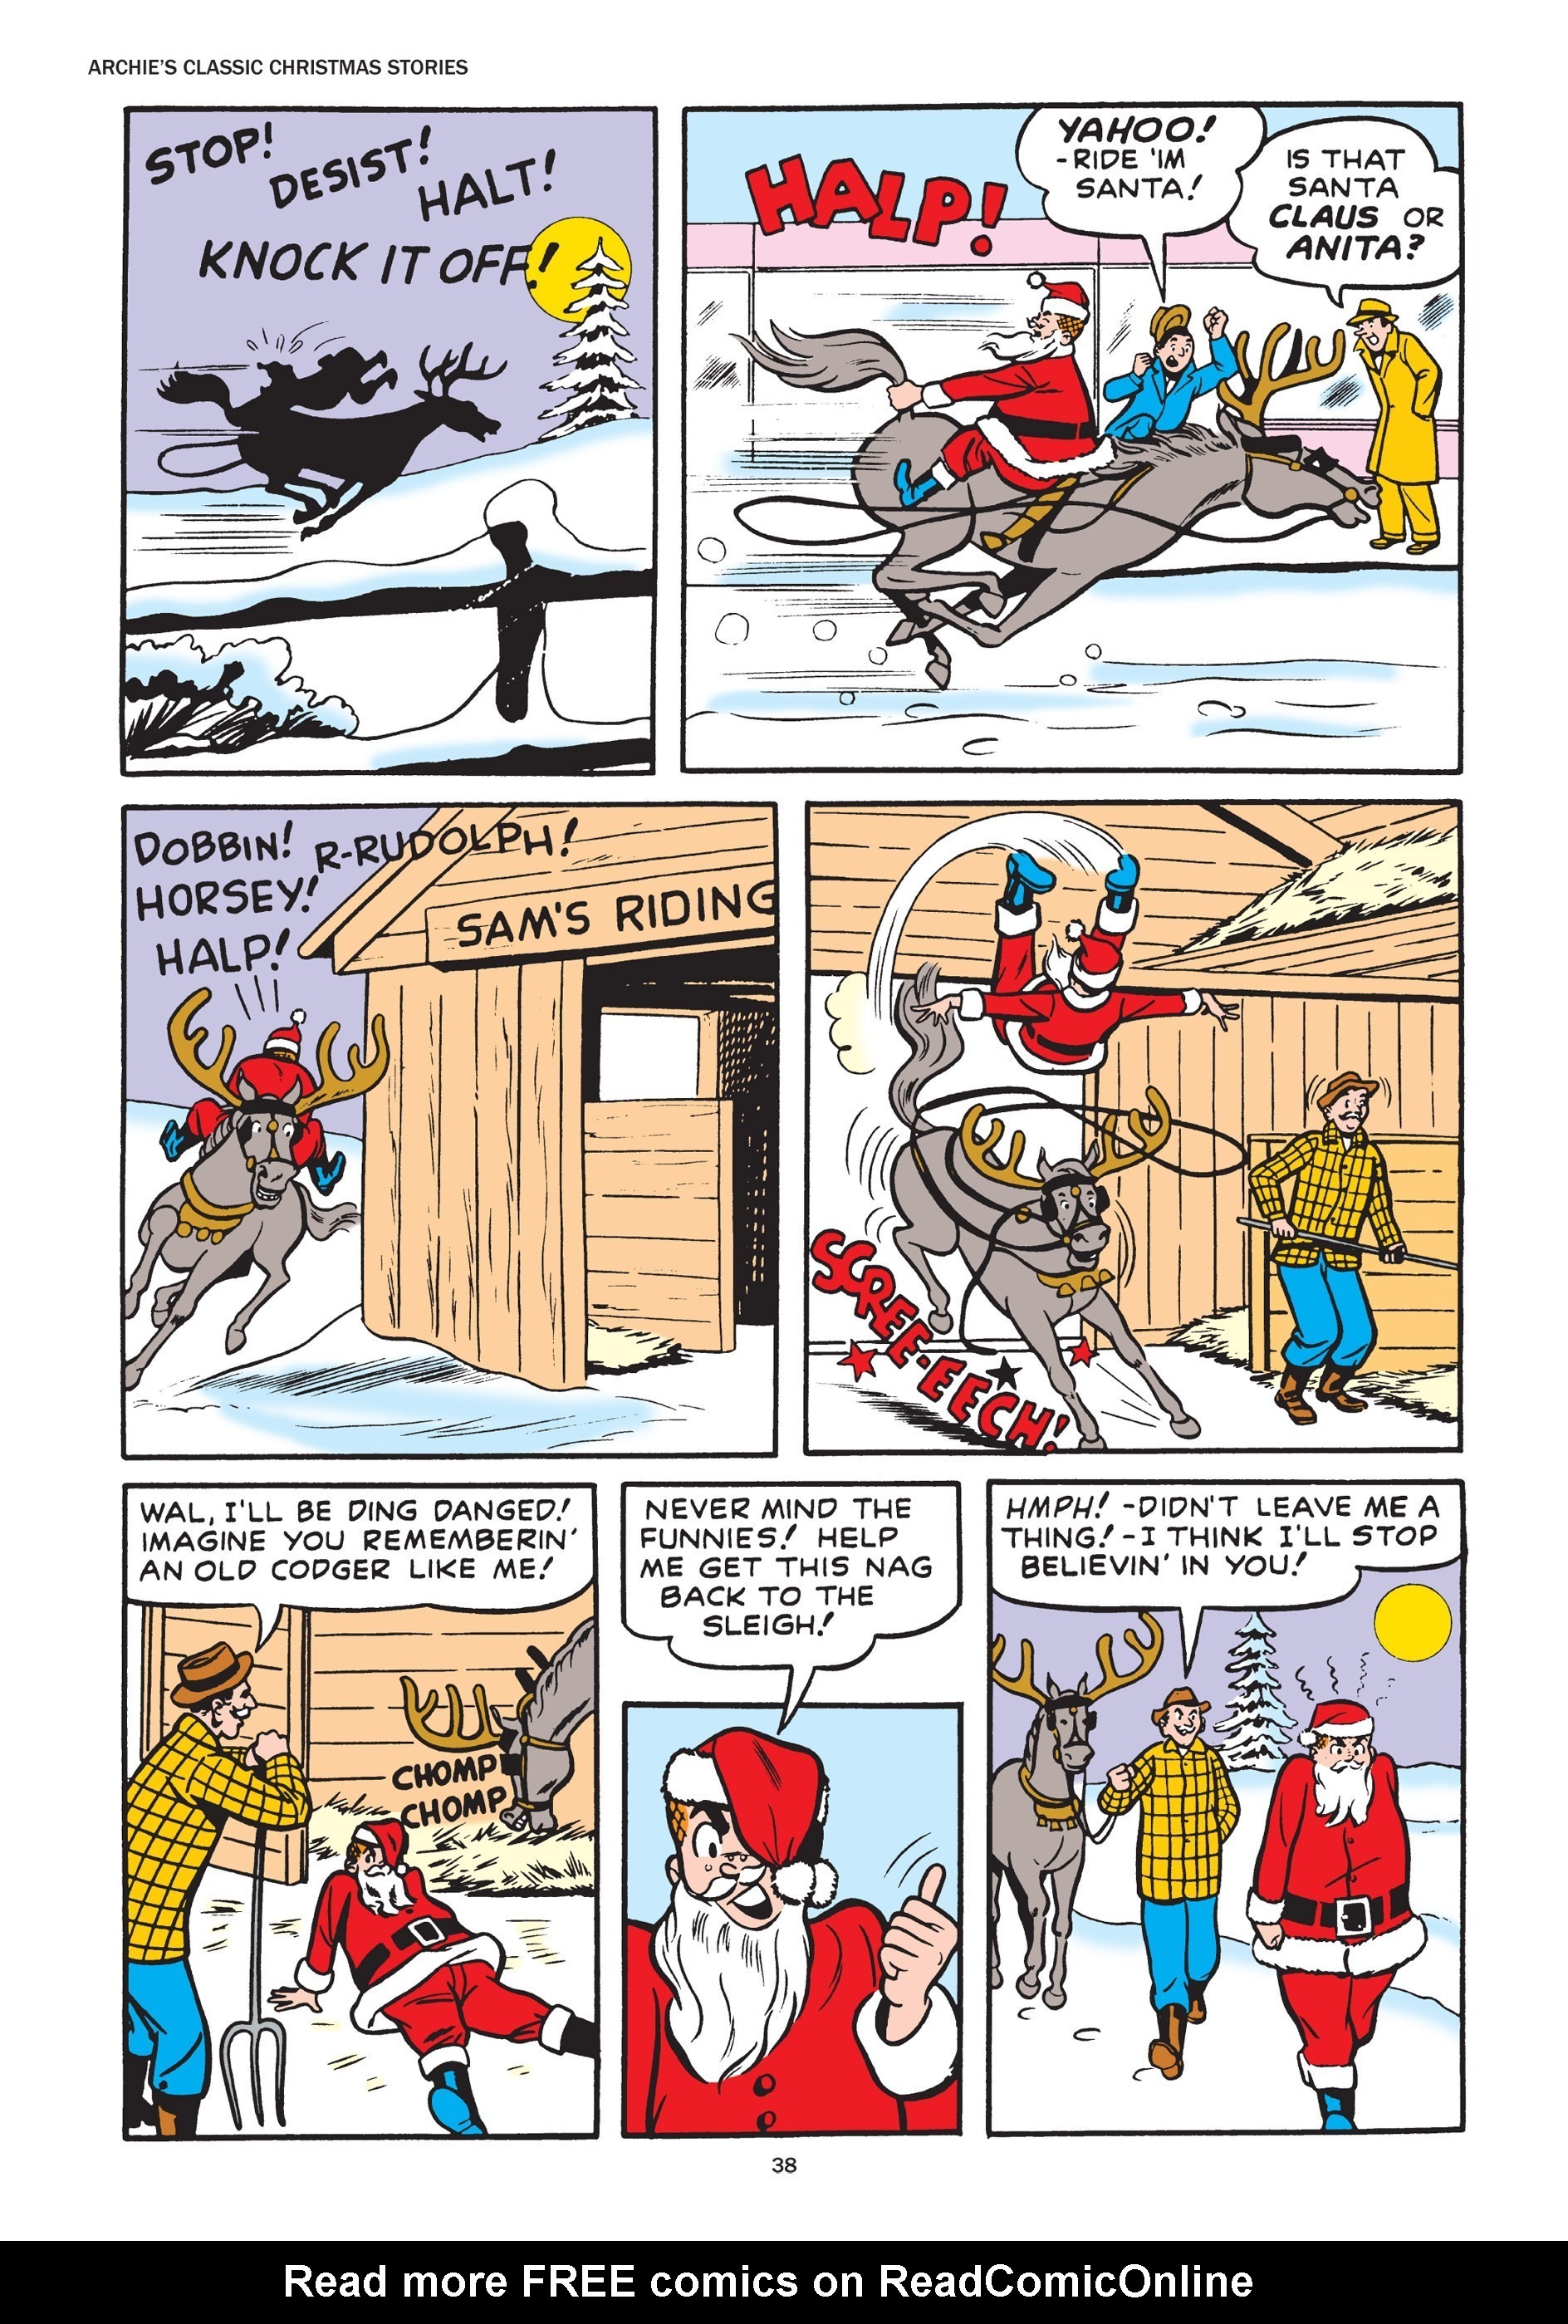 Read online Archie's Classic Christmas Stories comic -  Issue # TPB - 39